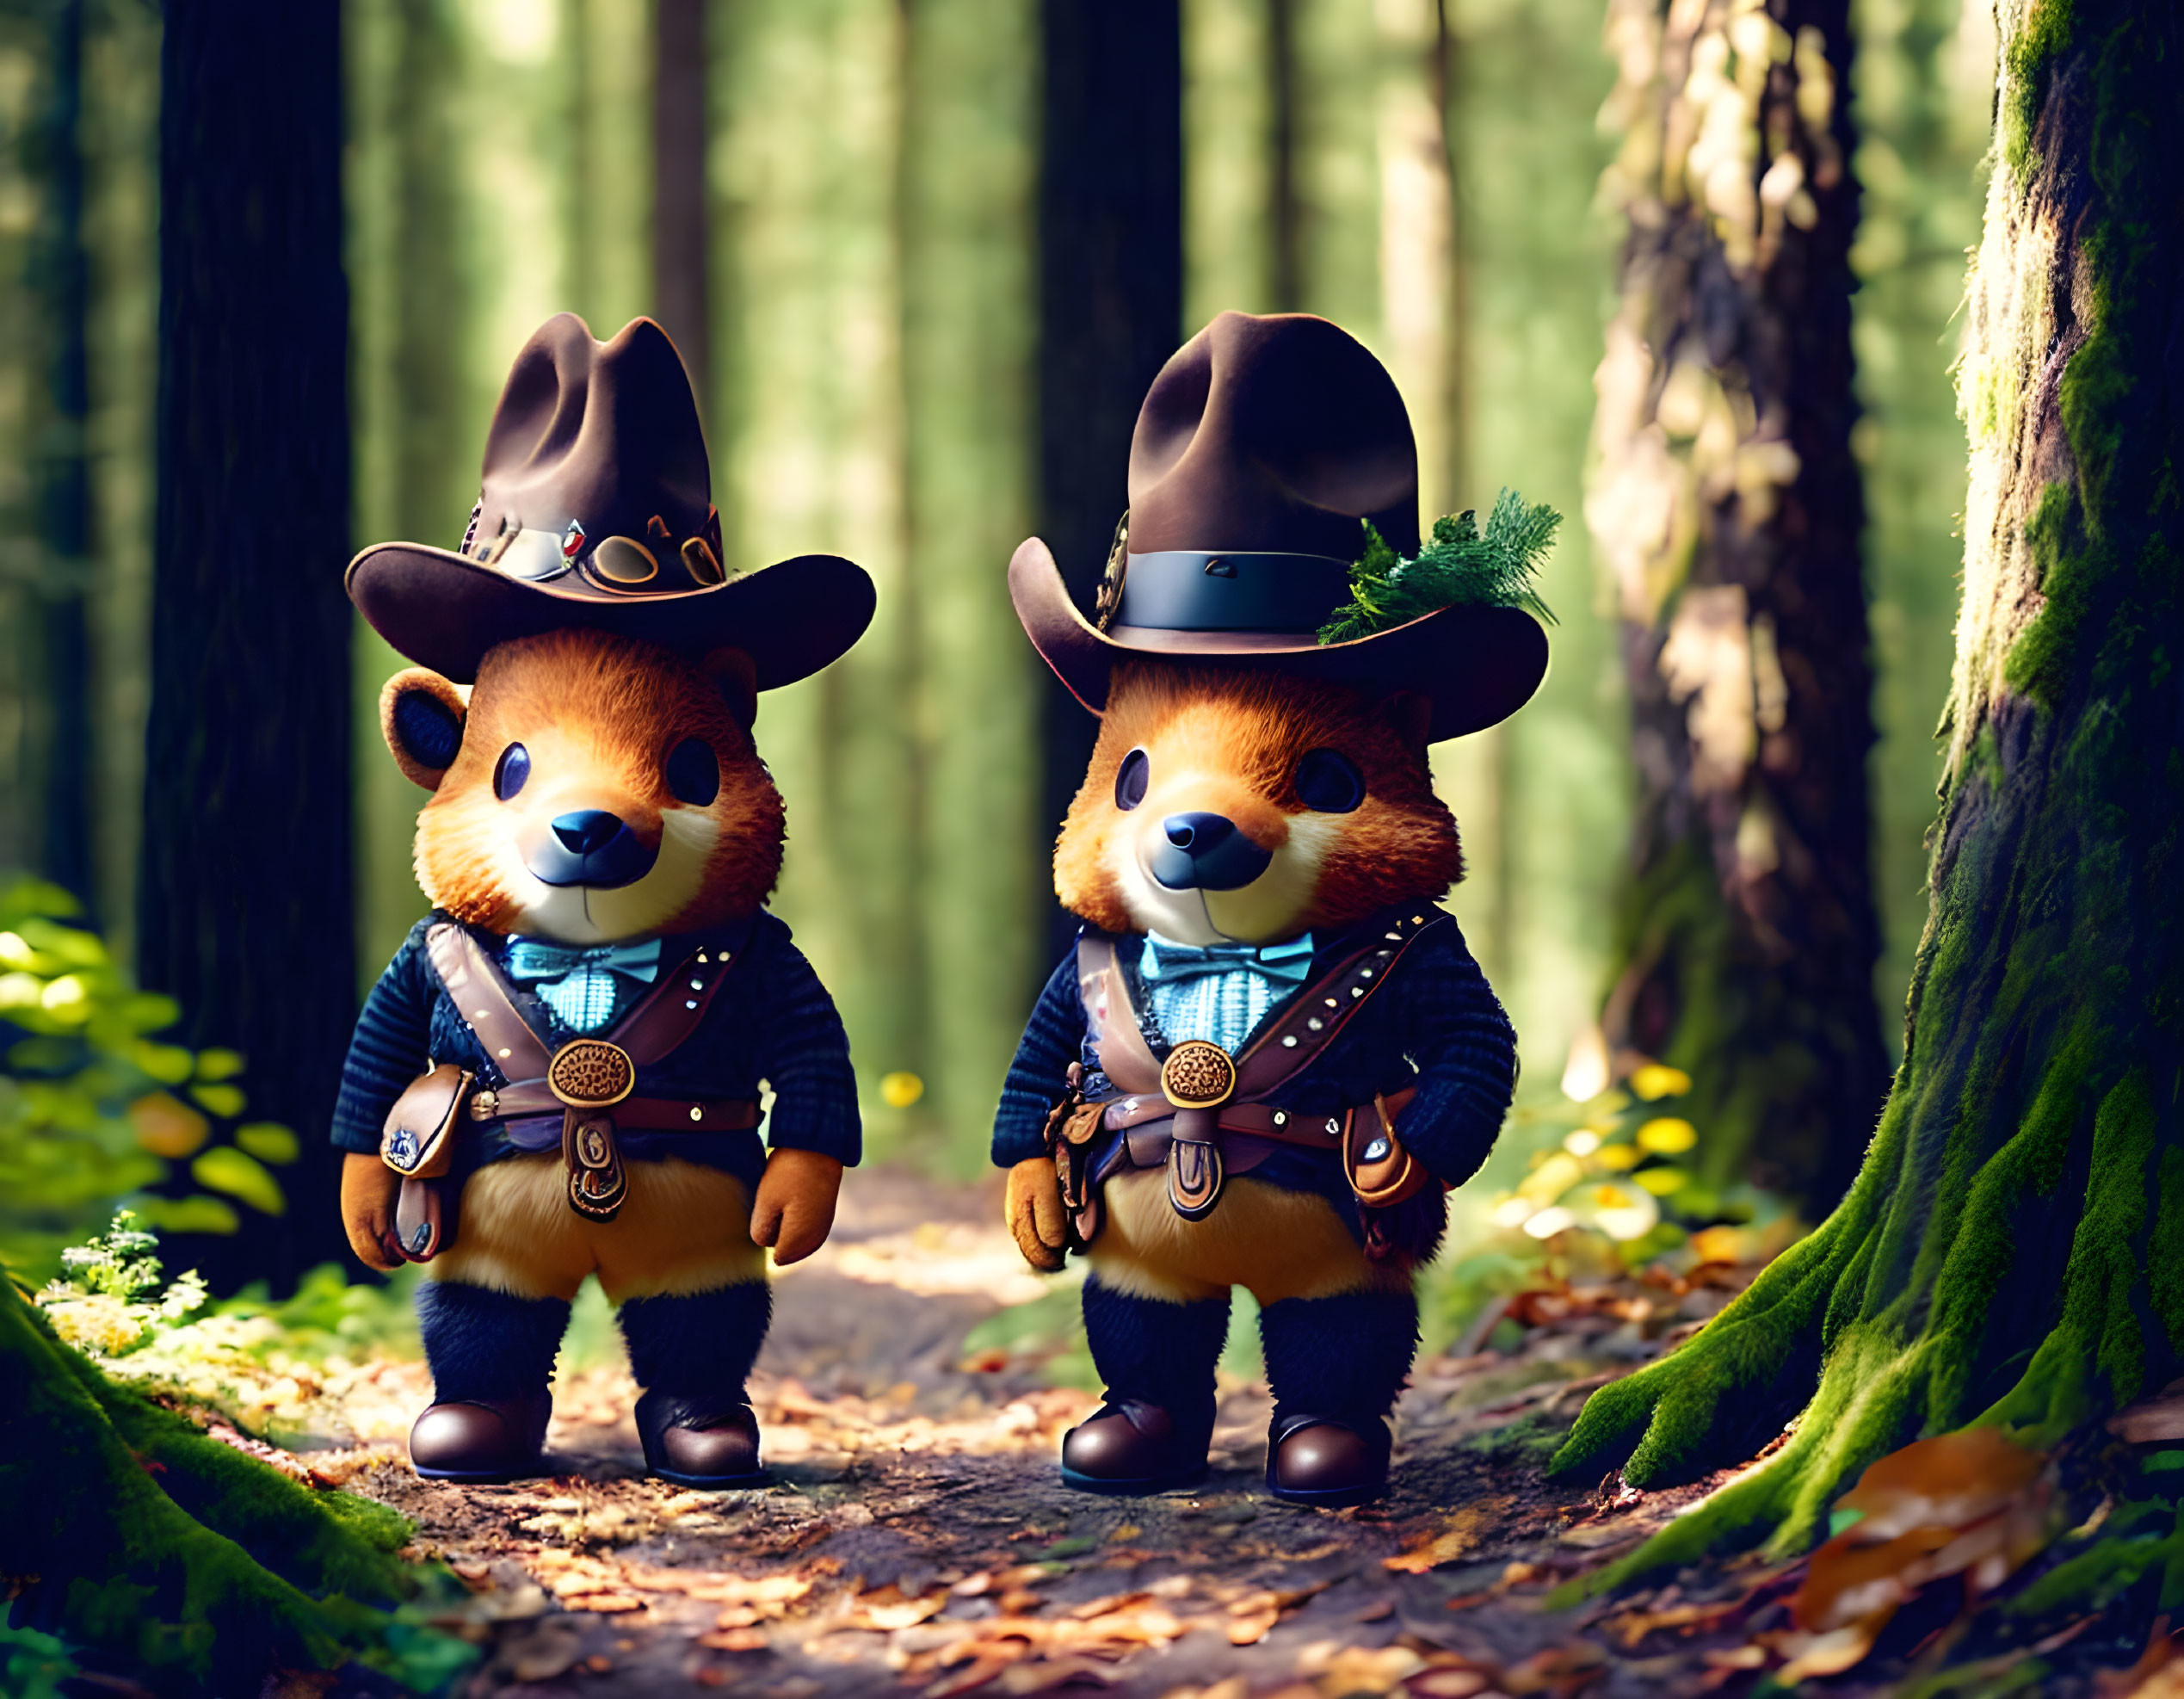 Cowboy-themed teddy bears on forest path with sunlight filtering through trees